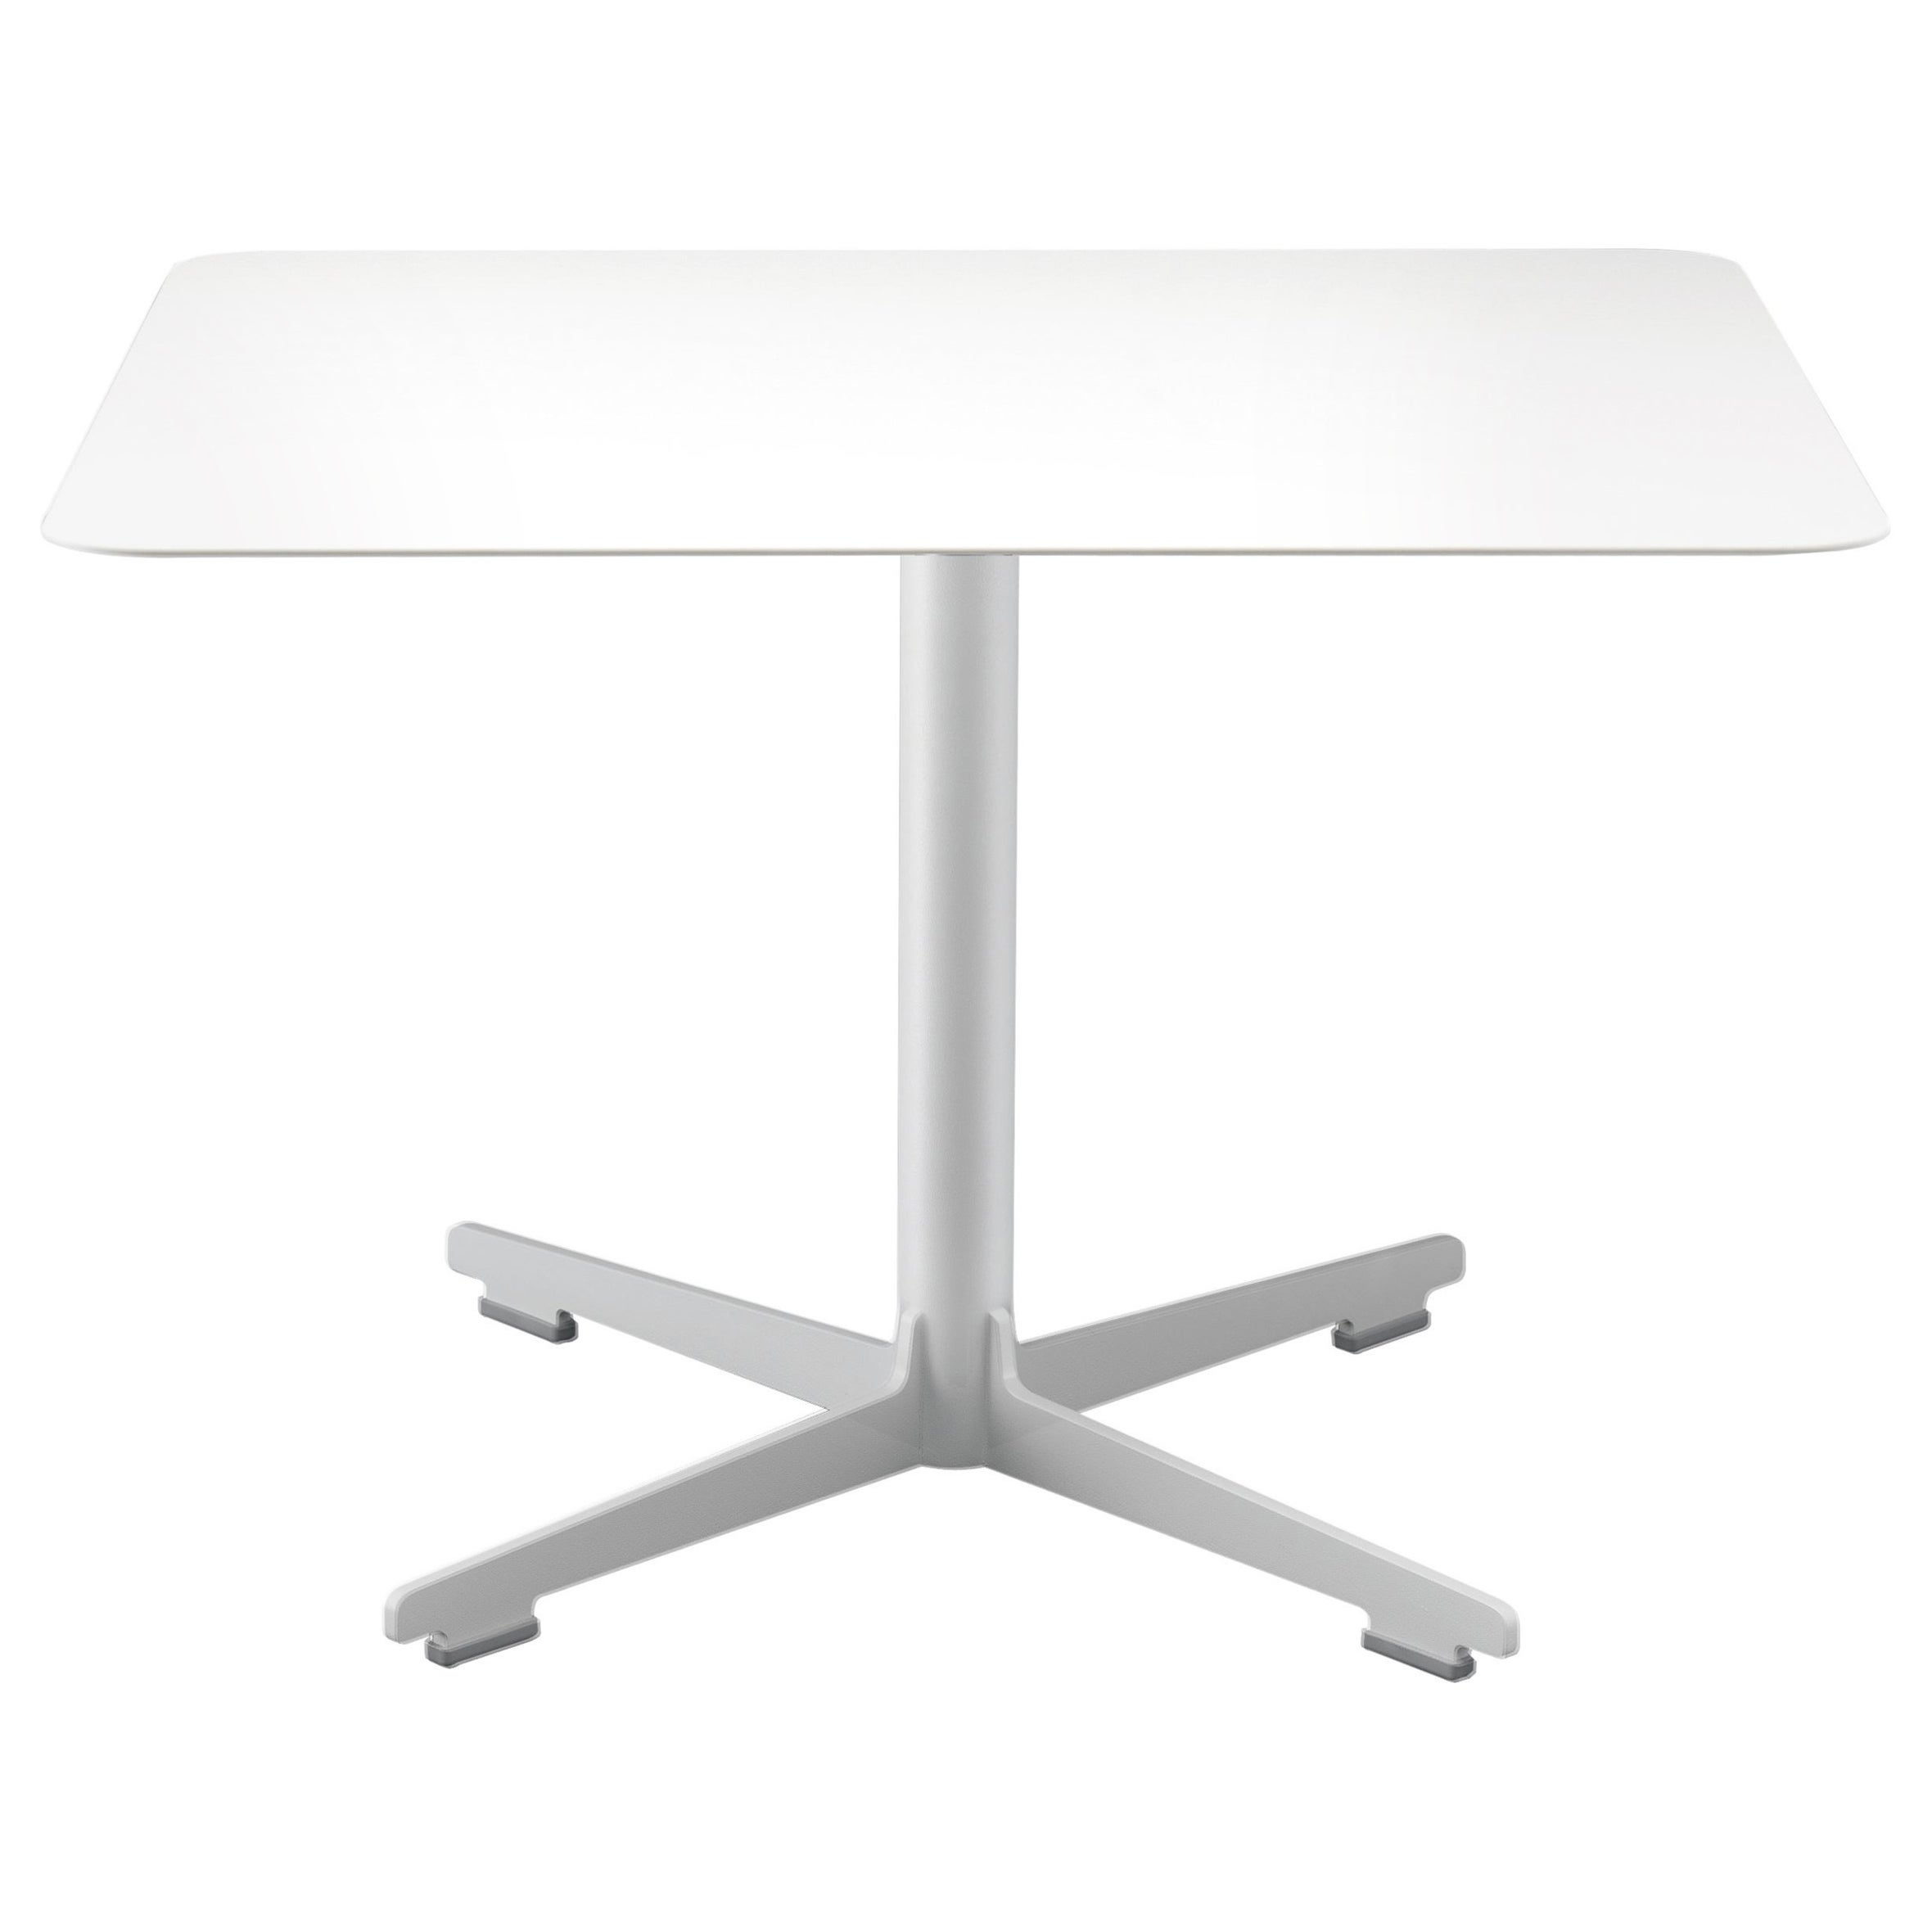 Alias Small 574 Cross Table with White Top and Lacquered Steel Base